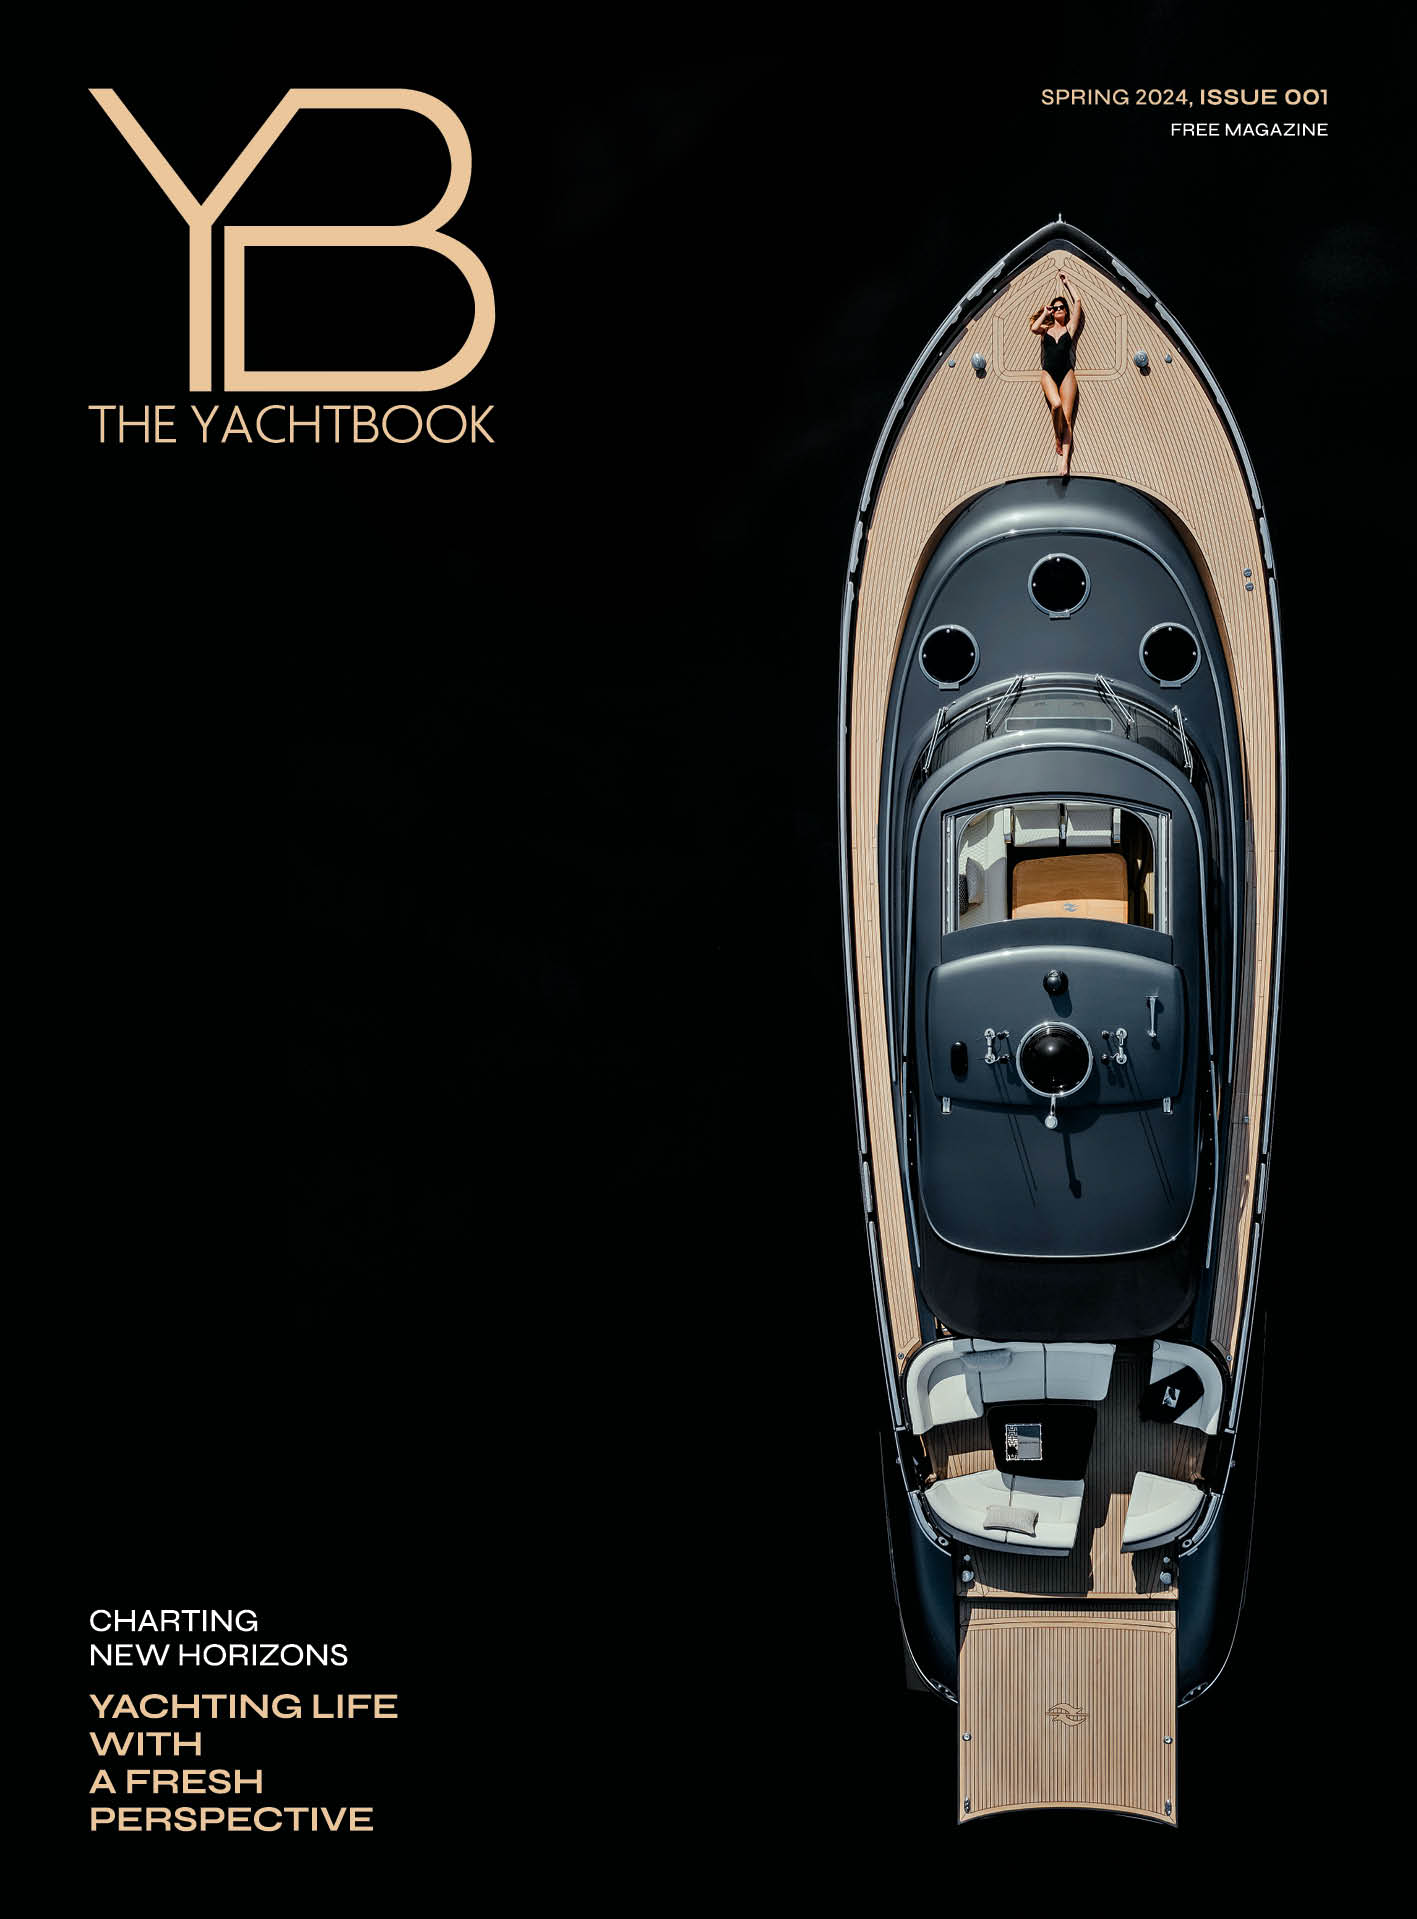 The Yachtbook – Spring 2024, Issue 001